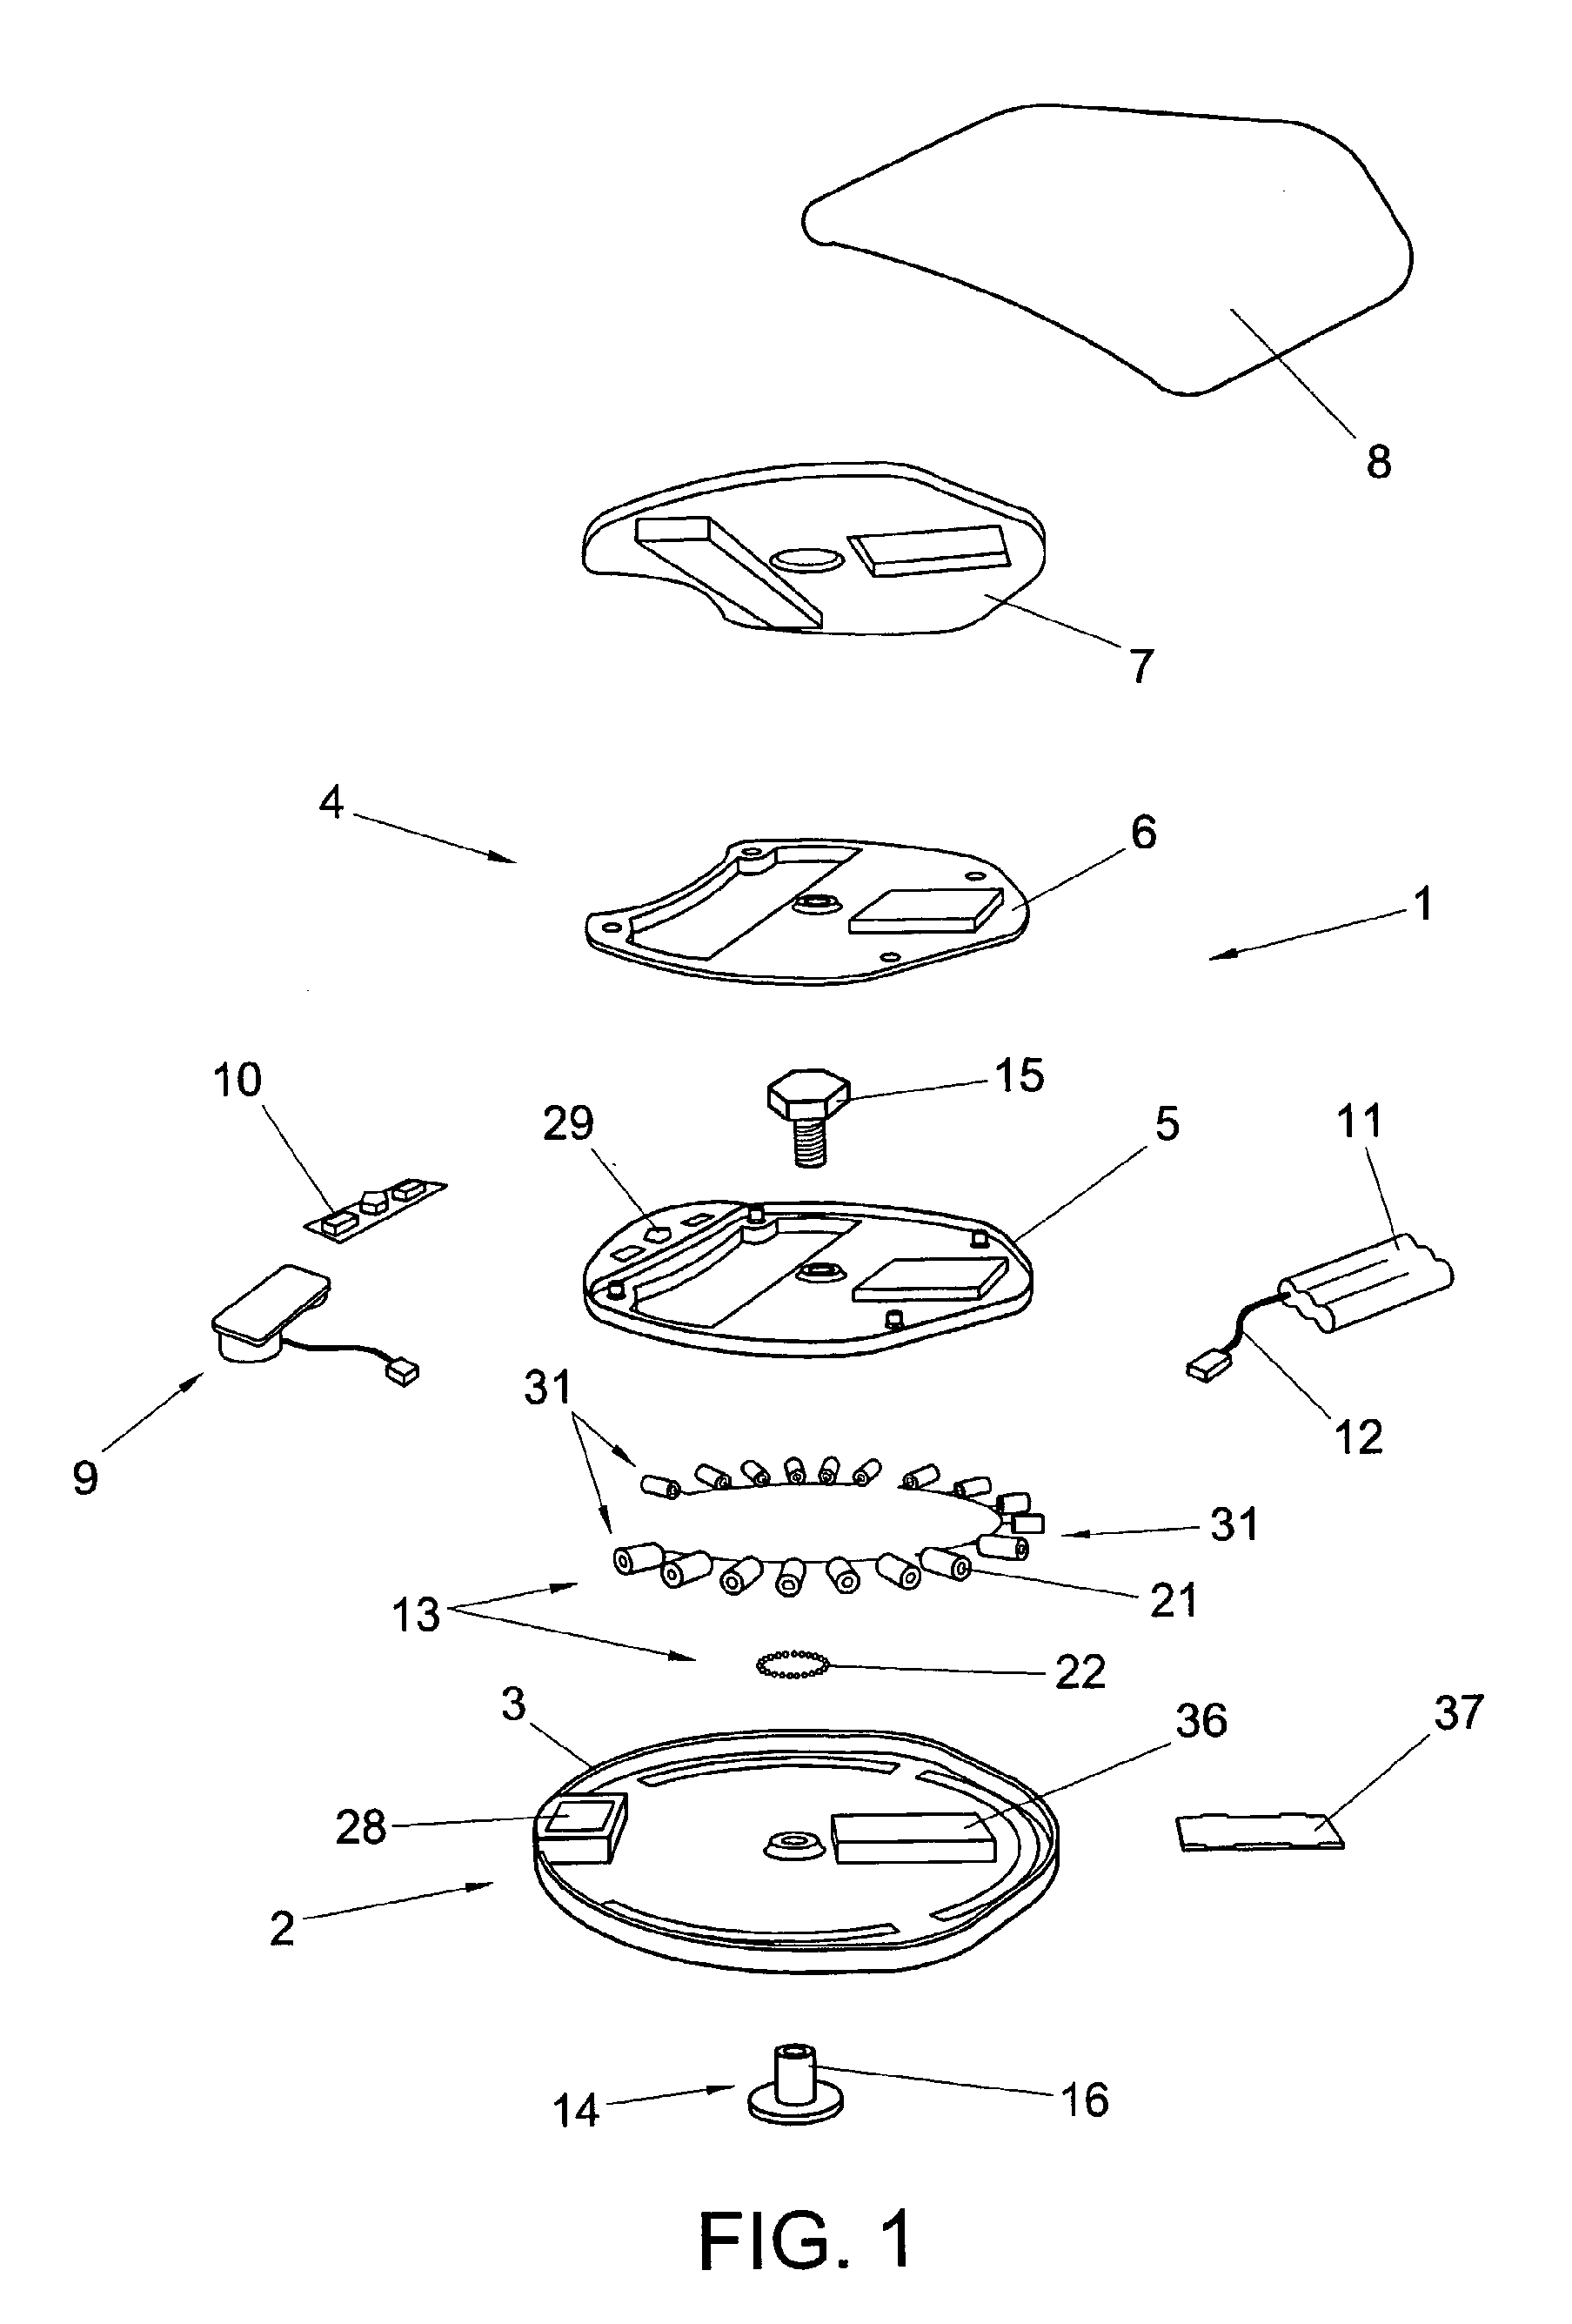 Sitting support and method for ergonomically supporting a sitting person